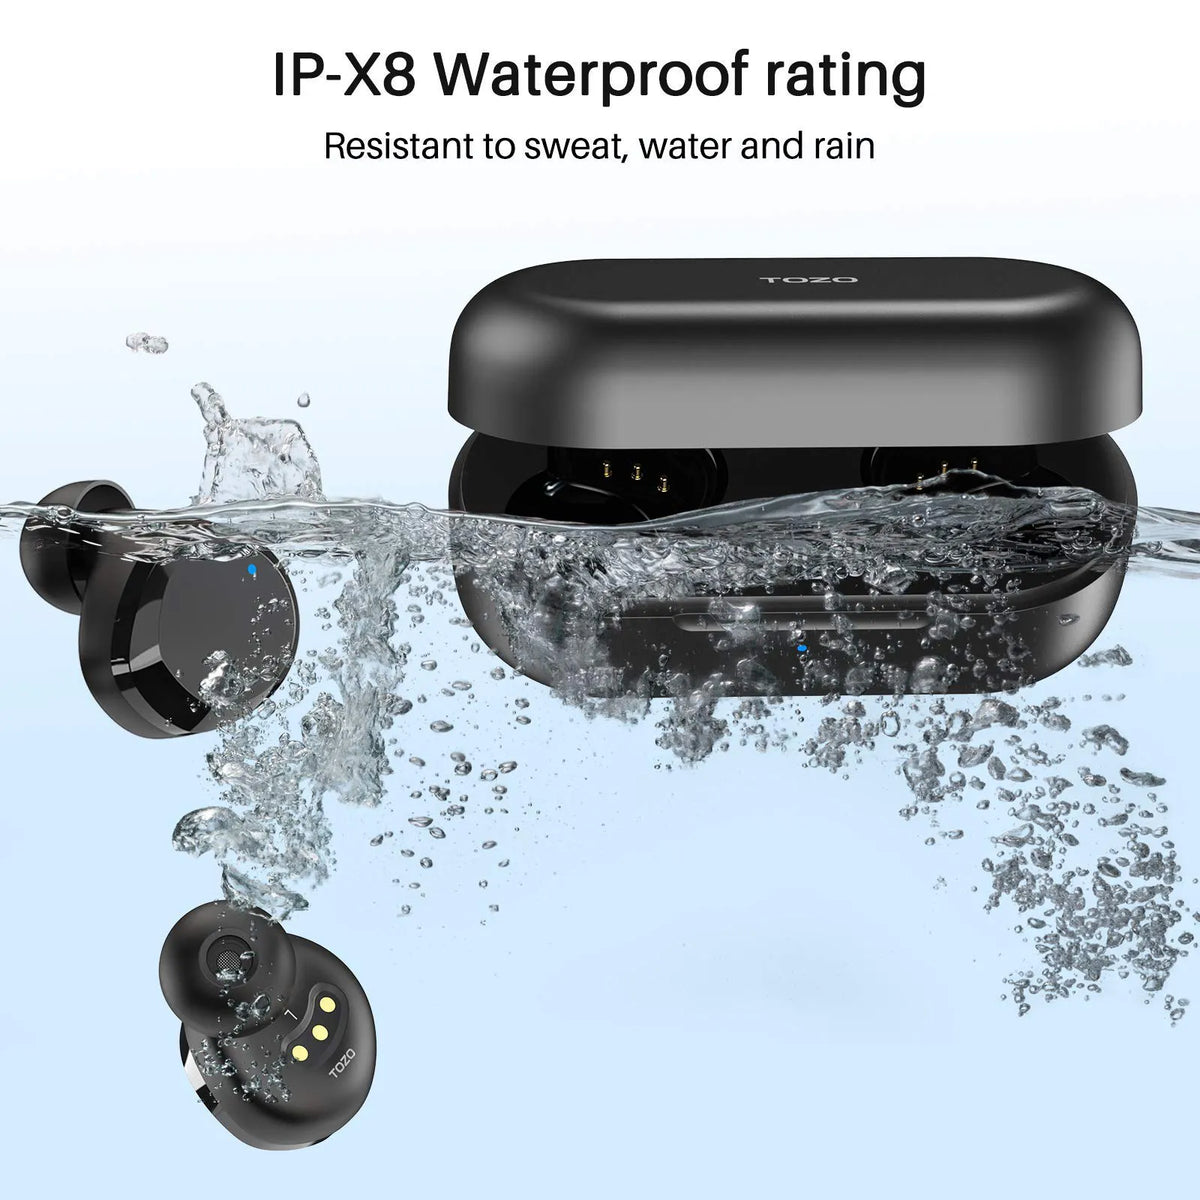 TOZO T12 Wireless Earbuds,Bluetooth 5.3 Version,OrigX Acoustic,IPX8  Waterproof - Champagne 